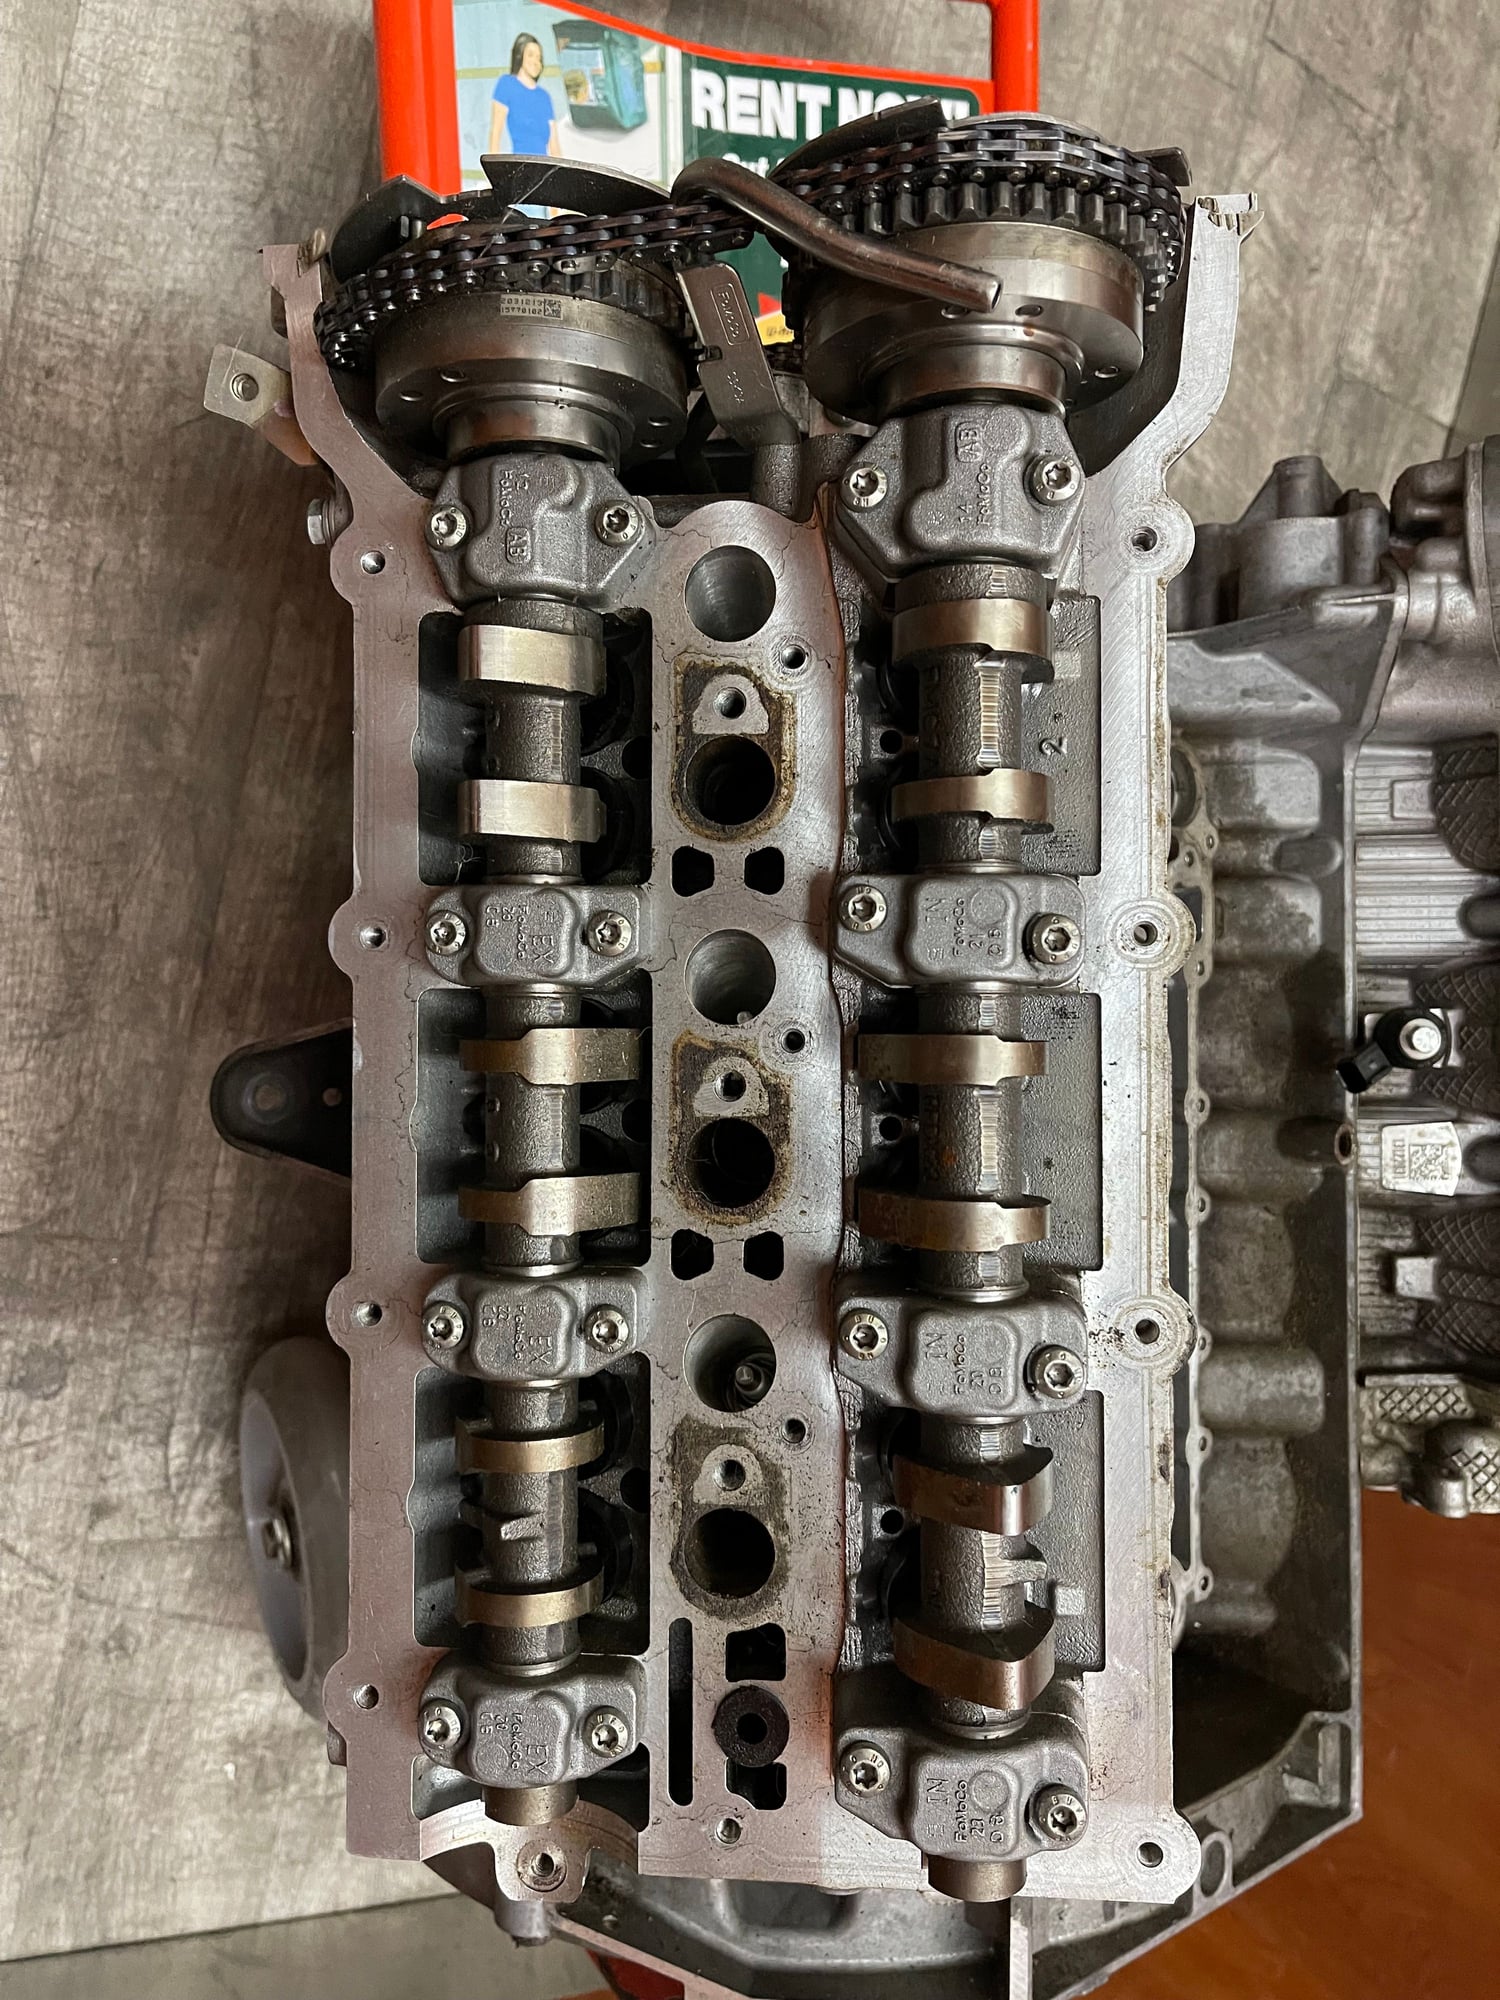 Engine - Internals - Cylinder Heads from 3.0 - Used - 2014 Jaguar F-Type - Dallas, TX 75201, United States